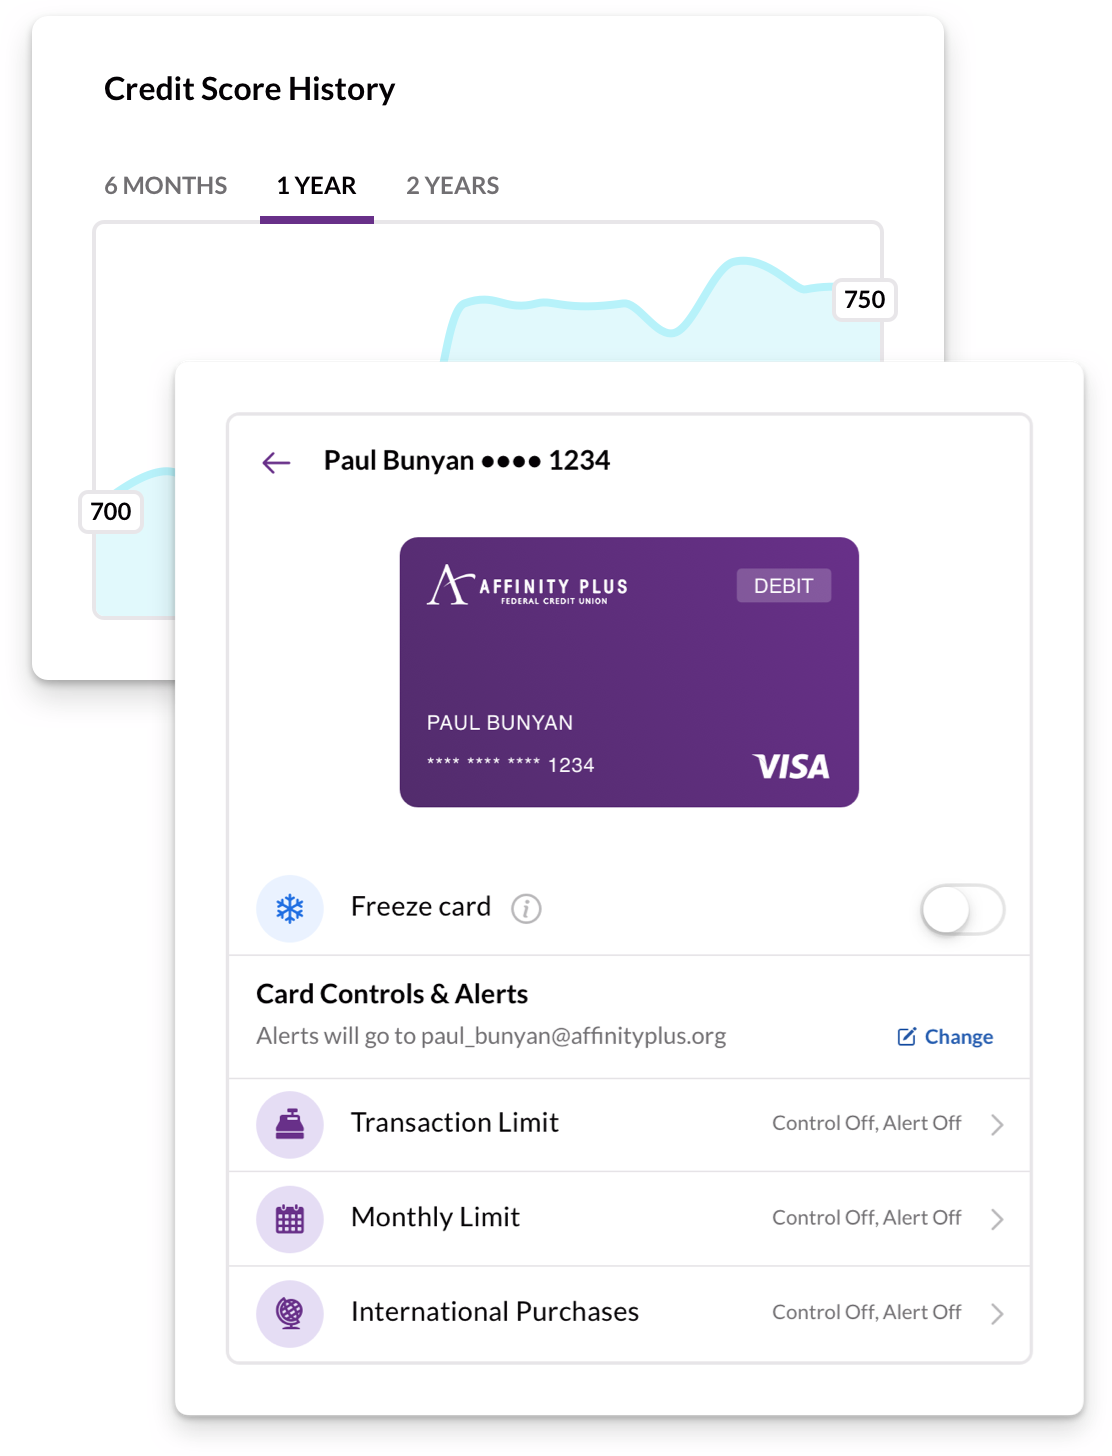 Affinity Plus Online Banking Security Features – Credit Monitoring and Card Controls